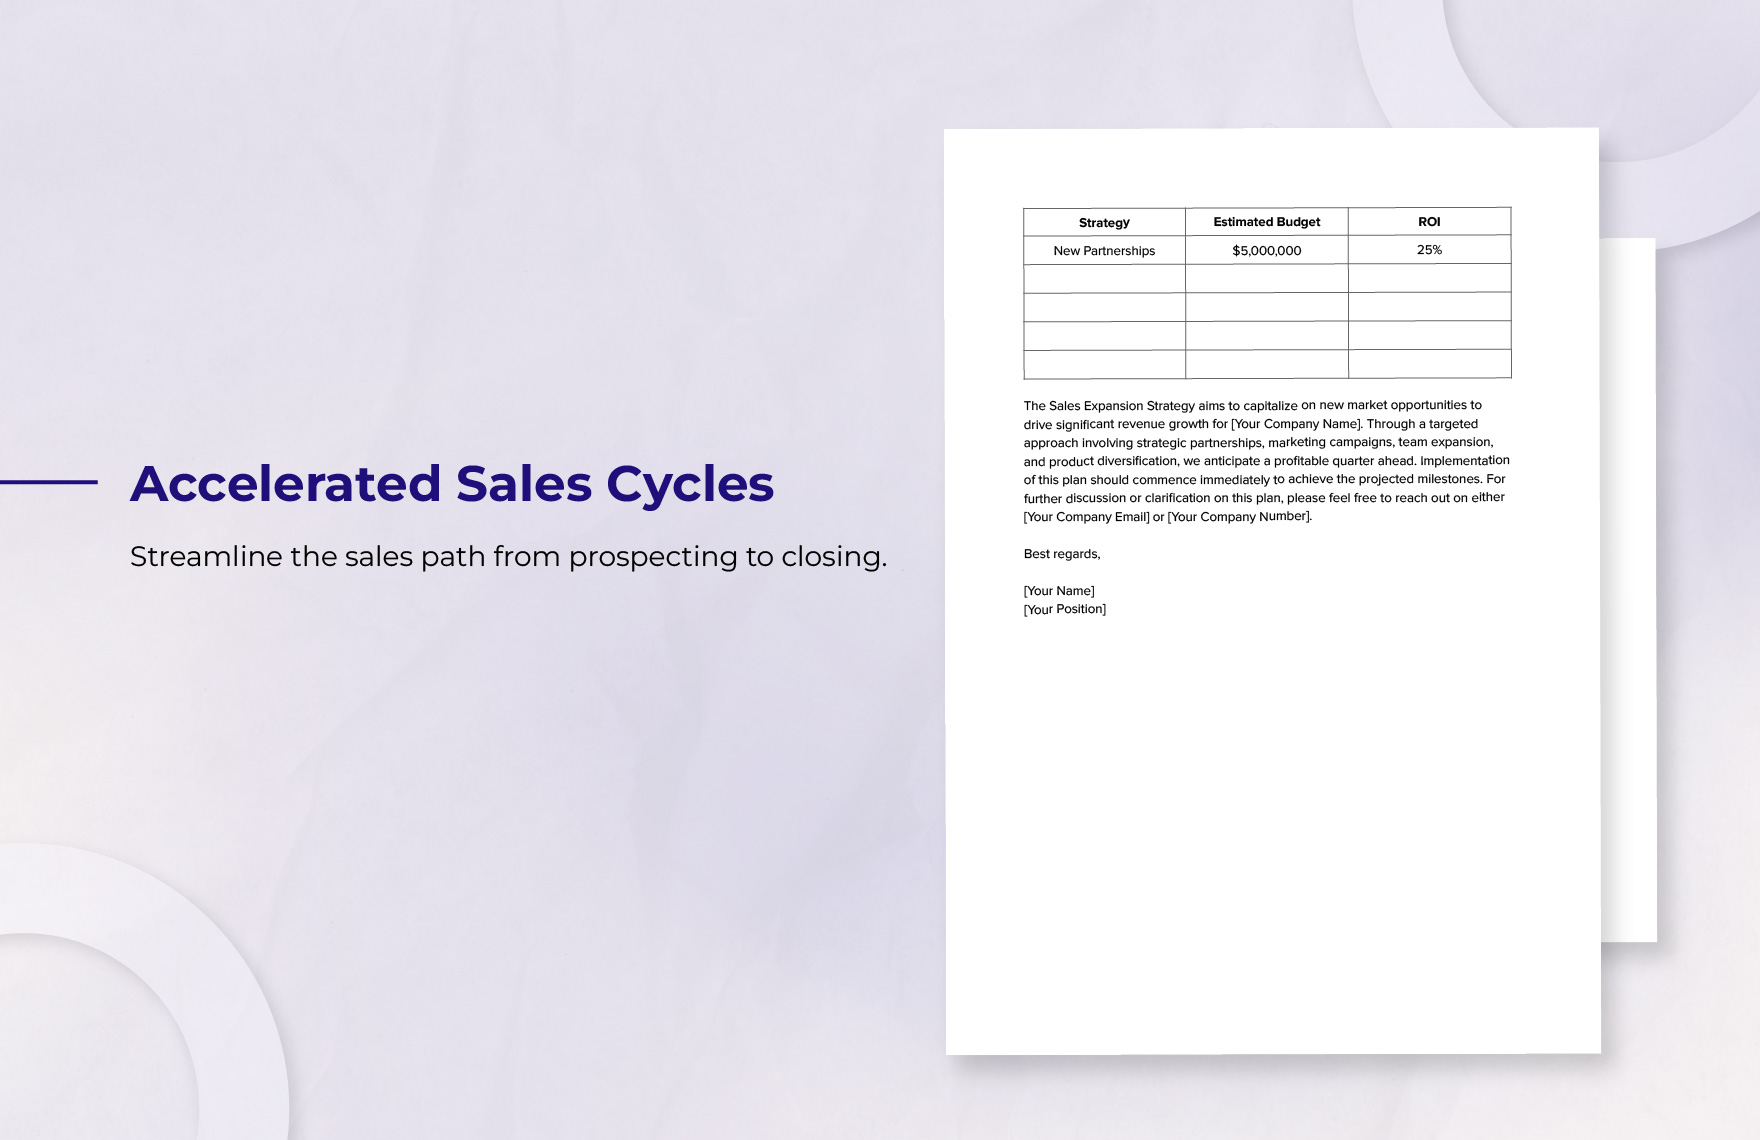 Sales Expansion Strategy Memo Template